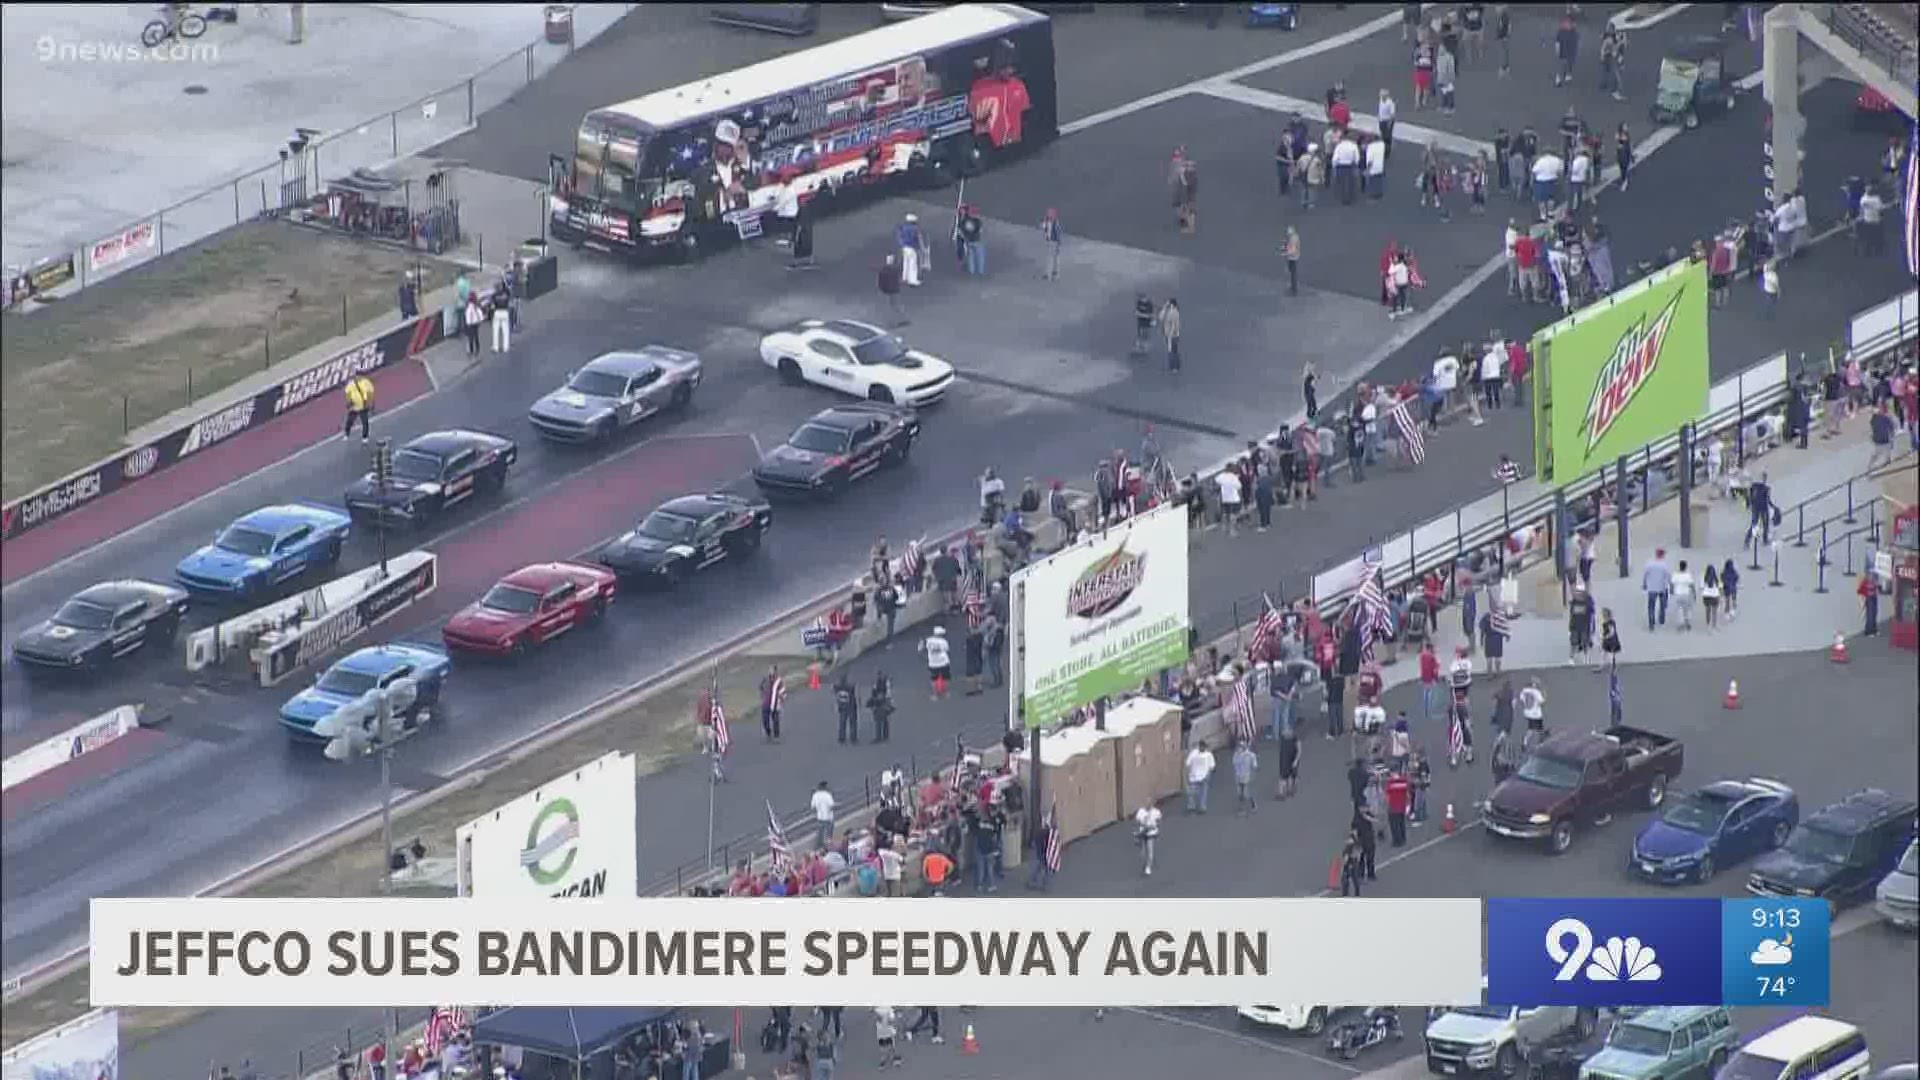 This is the second time that Jeffco Public Health has sued Bandimere Speedway.